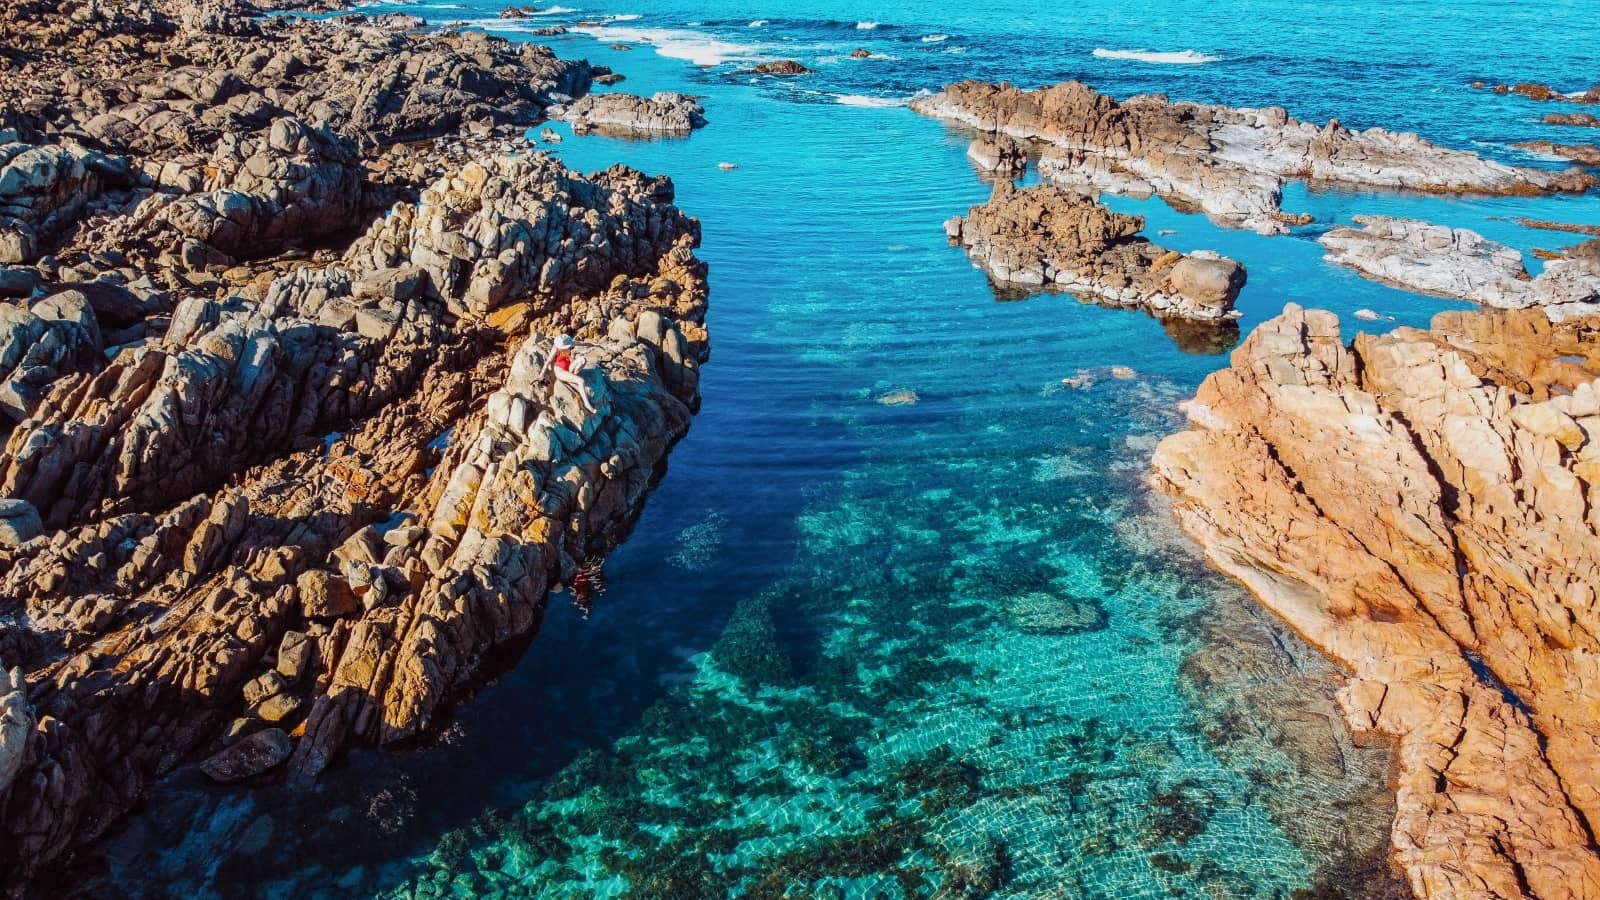 A bird's-eye view of the coastal formations at The Aquarium in Yallingup, Western Australia, showcasing clear, turquoise waters between rugged, orange-hued rocks, with a woman perched on the cliffs enjoying the view